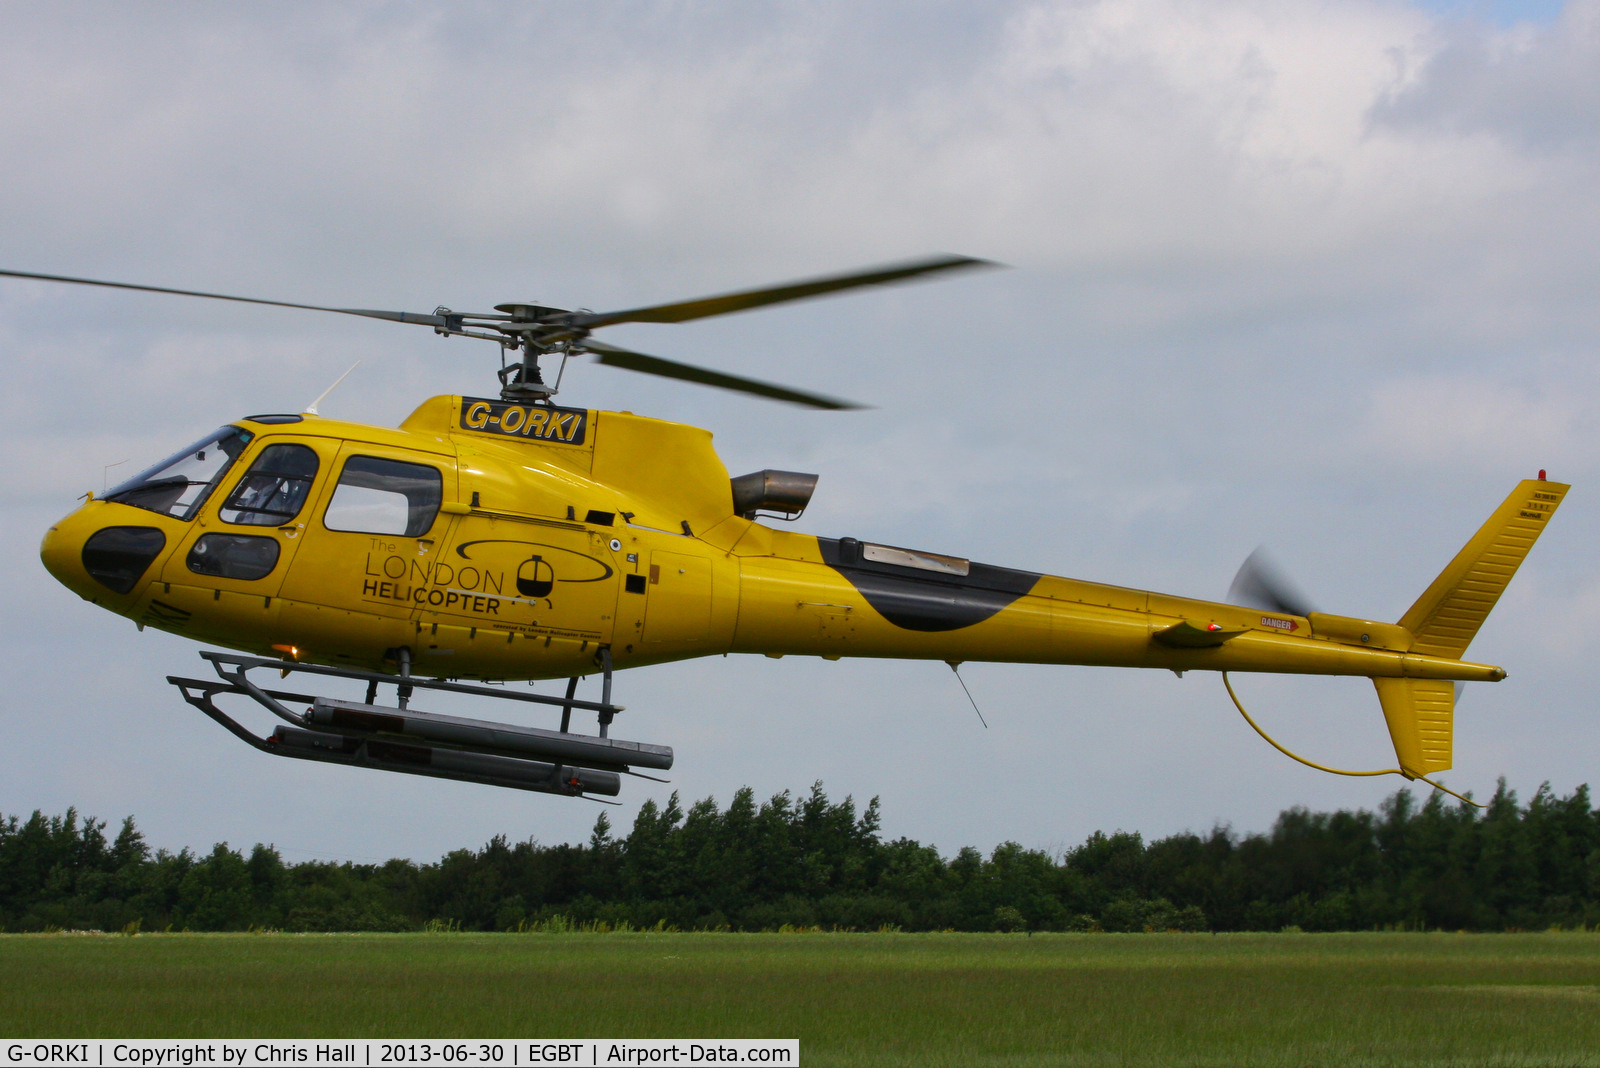 G-ORKI, 2002 Eurocopter AS-350B-3 Ecureuil Ecureuil C/N 3587, being used for ferrying race fans to the British F1 Grand Prix at Silverstone